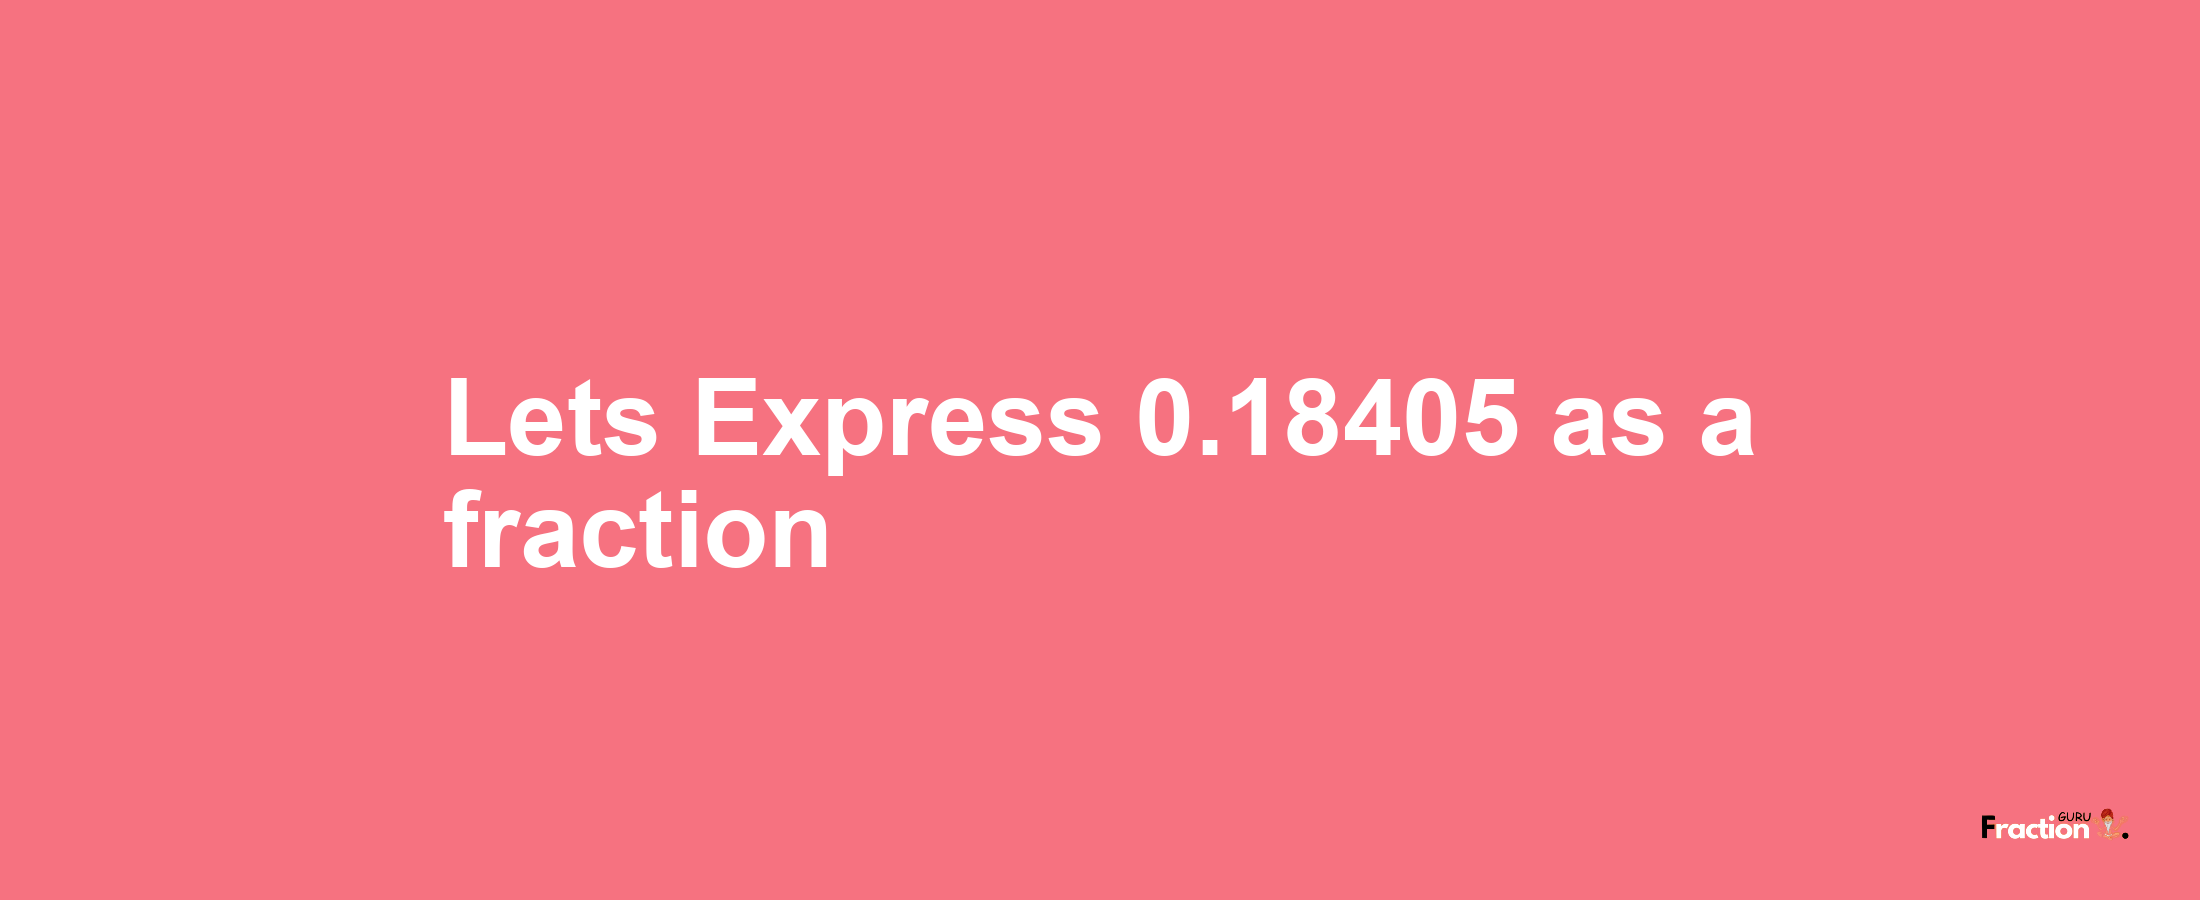 Lets Express 0.18405 as afraction